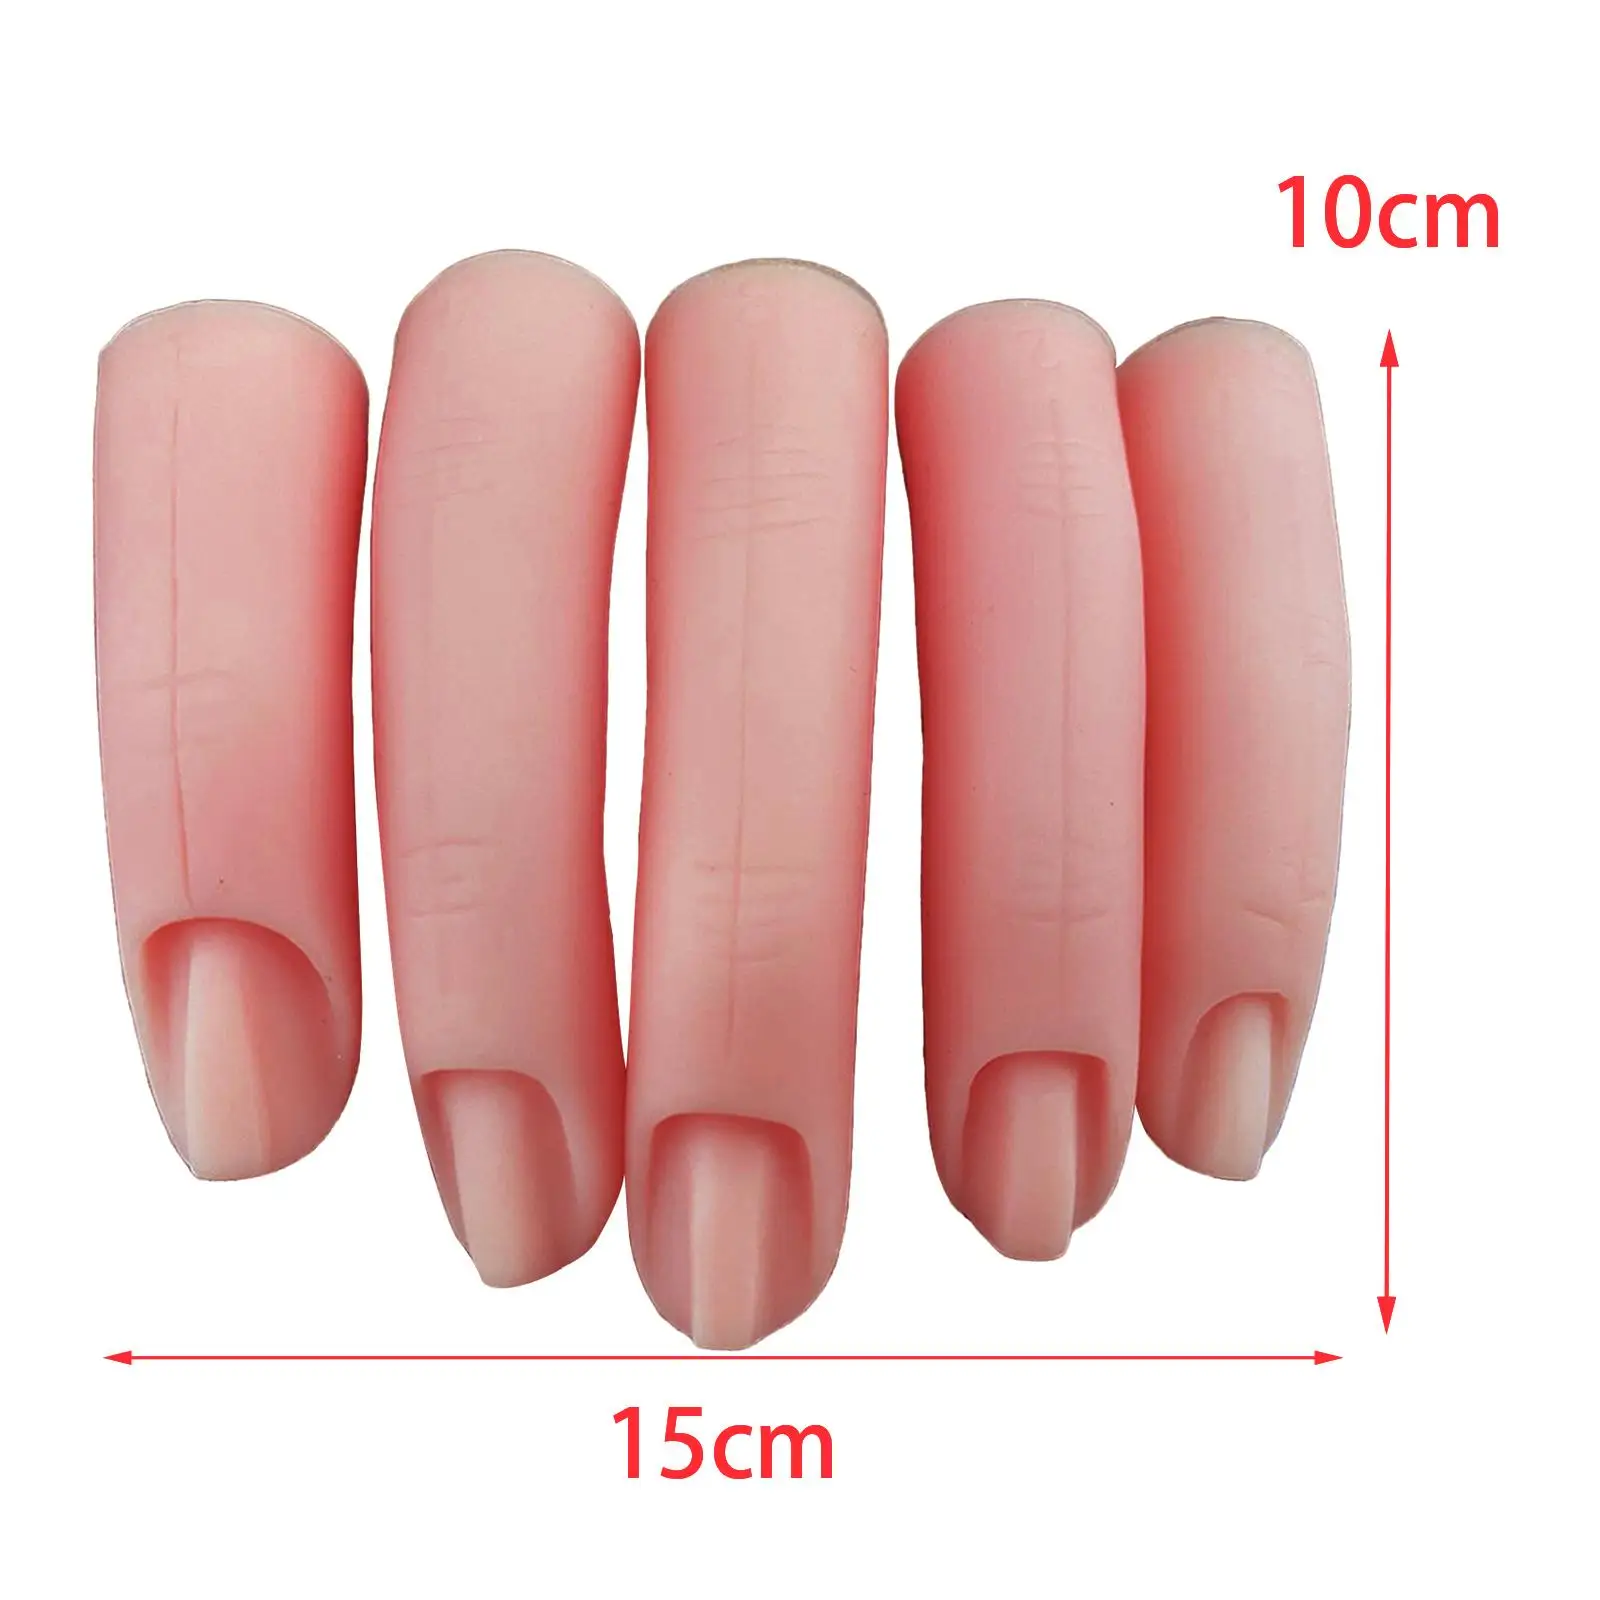 5x Silicone Practice Finger Training Display Tools Fake Finger for Nails Practice